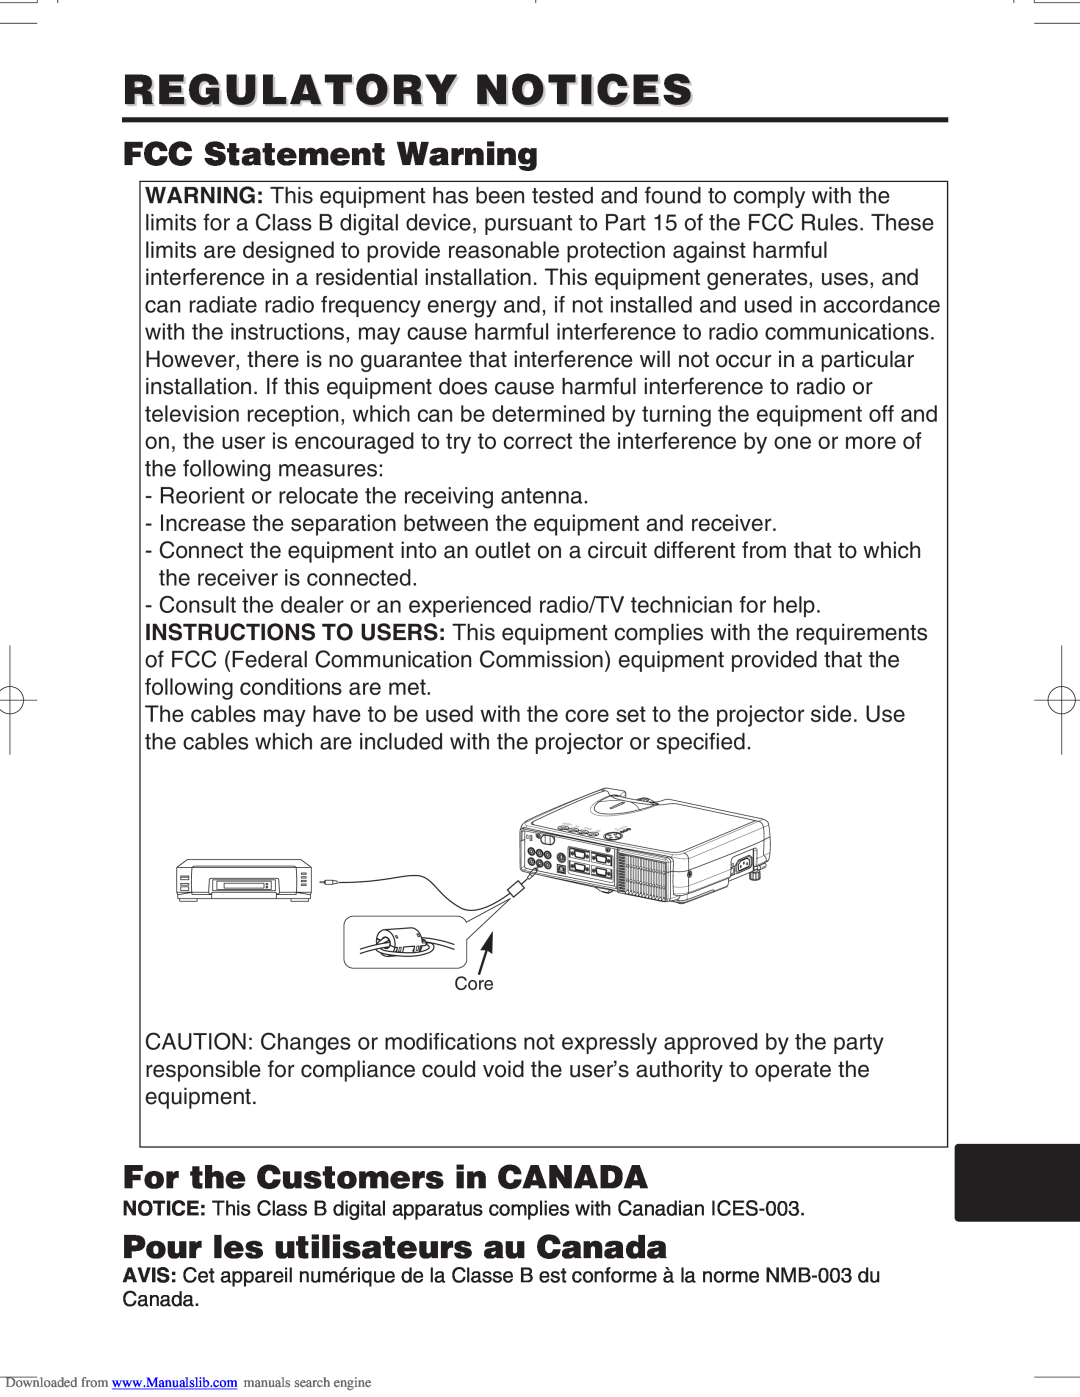 Hitachi CPX328W Regulatory Notices, FCC Statement Warning, For the Customers in CANADA, Pour les utilisateurs au Canada 